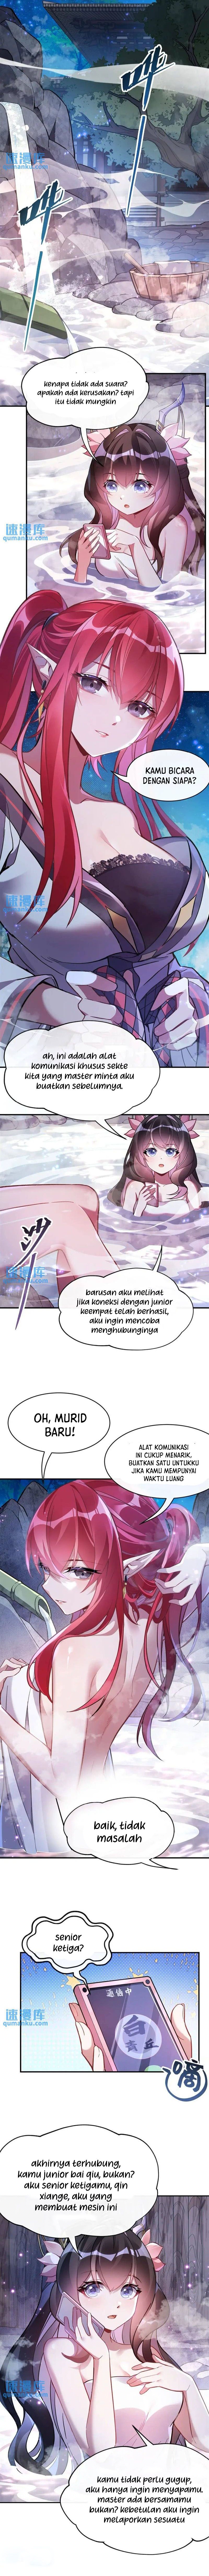 Dilarang COPAS - situs resmi www.mangacanblog.com - Komik my female apprentices are all big shots from the future 198 - chapter 198 199 Indonesia my female apprentices are all big shots from the future 198 - chapter 198 Terbaru 7|Baca Manga Komik Indonesia|Mangacan